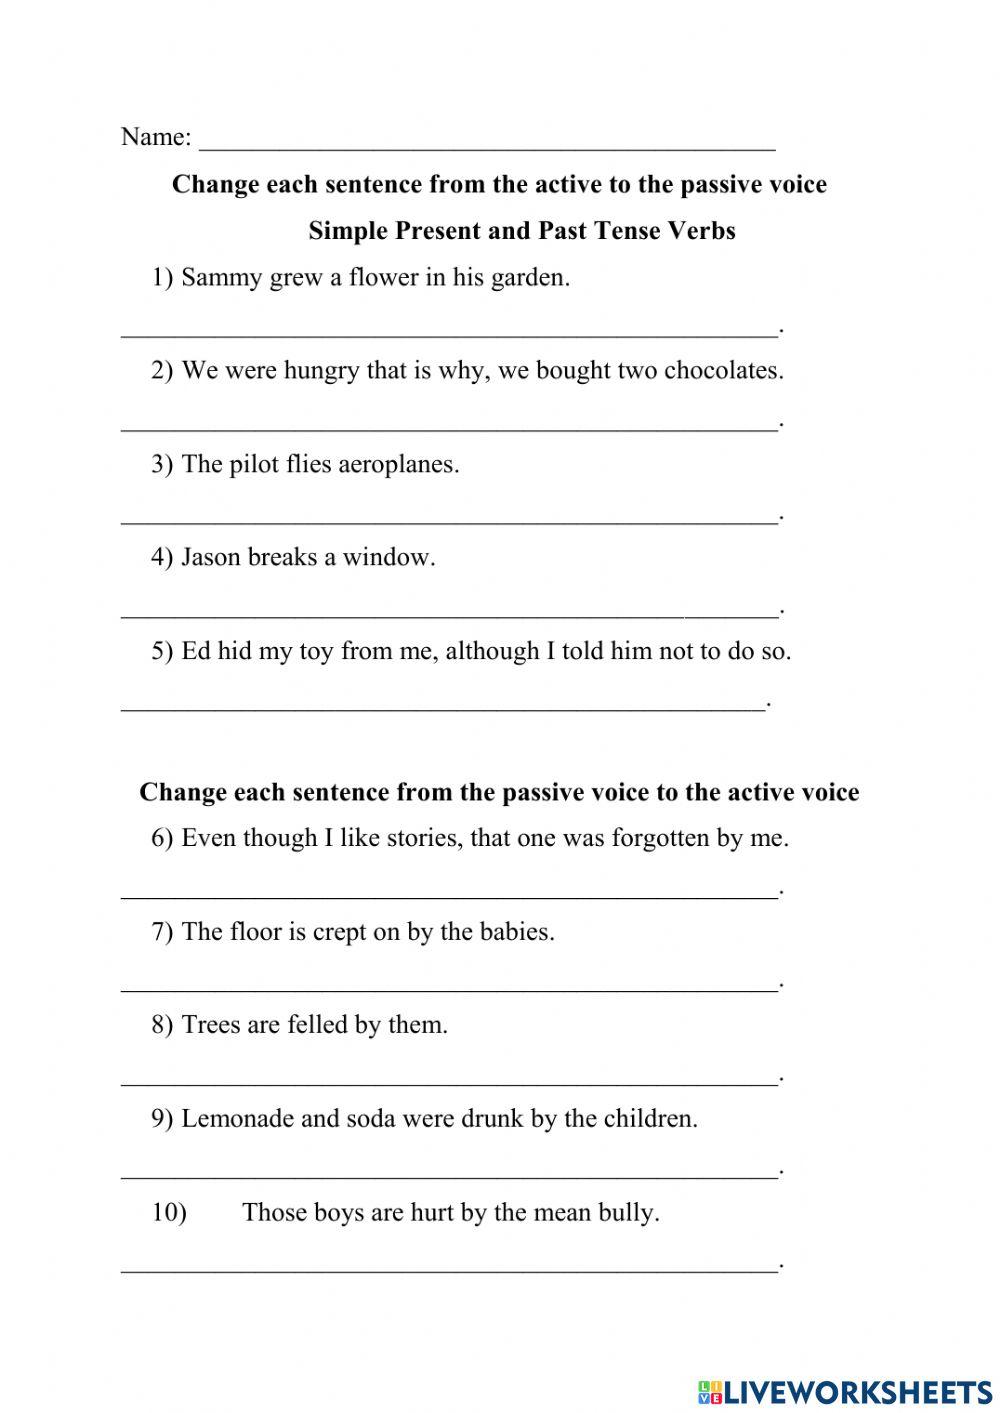 Active to the Passive Voice and Visa Versa (With Simple Present and Past Tense Verbs)